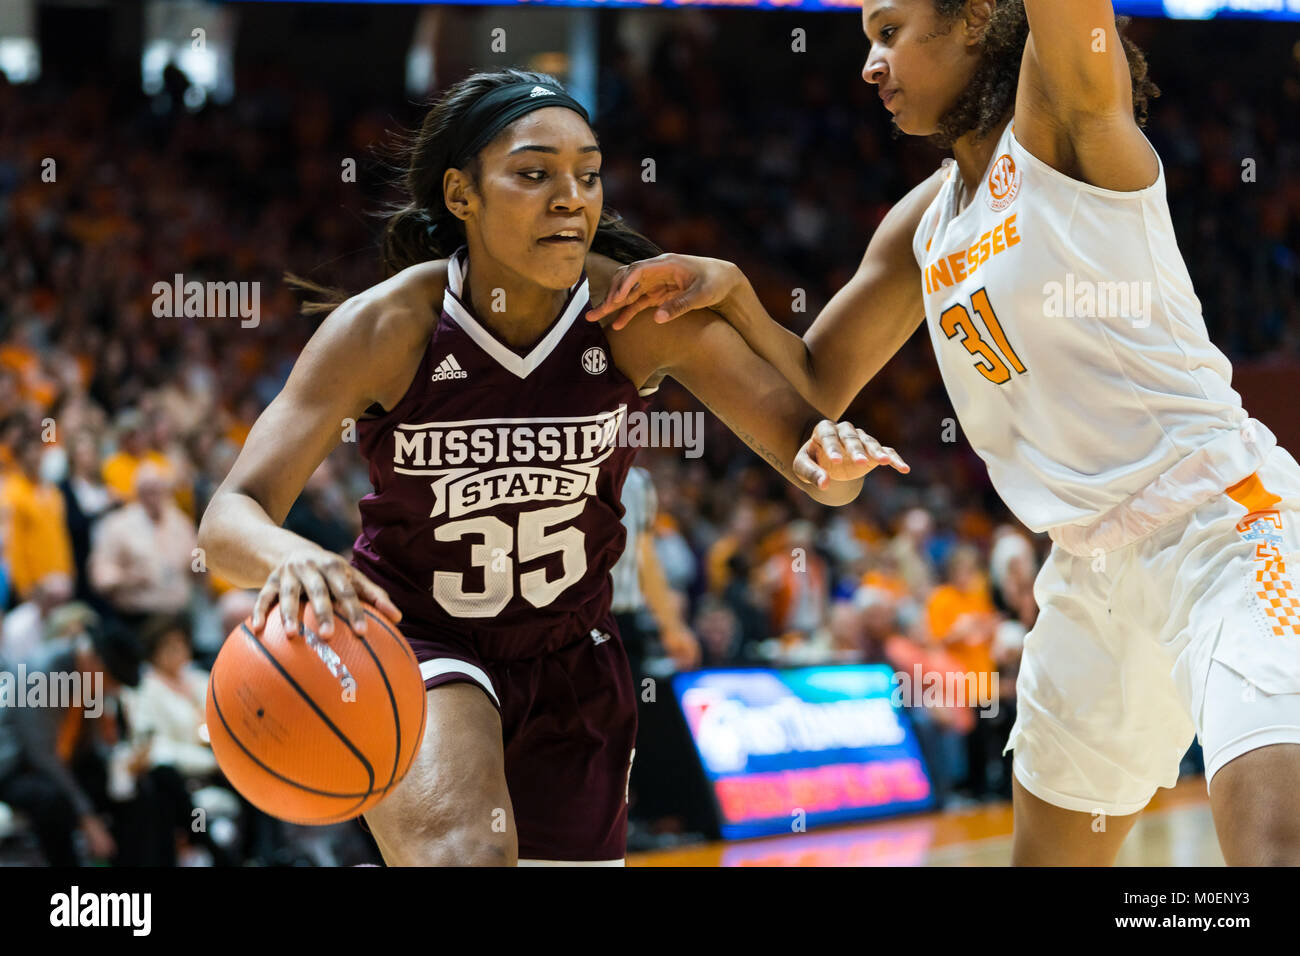 January 21, 2018: Victoria Vivians #35 of the Mississippi State Lady  Bulldogs drives to the basket against Jaime Nared #31 of the Tennessee Lady  Volunteers during the NCAA basketball game between the